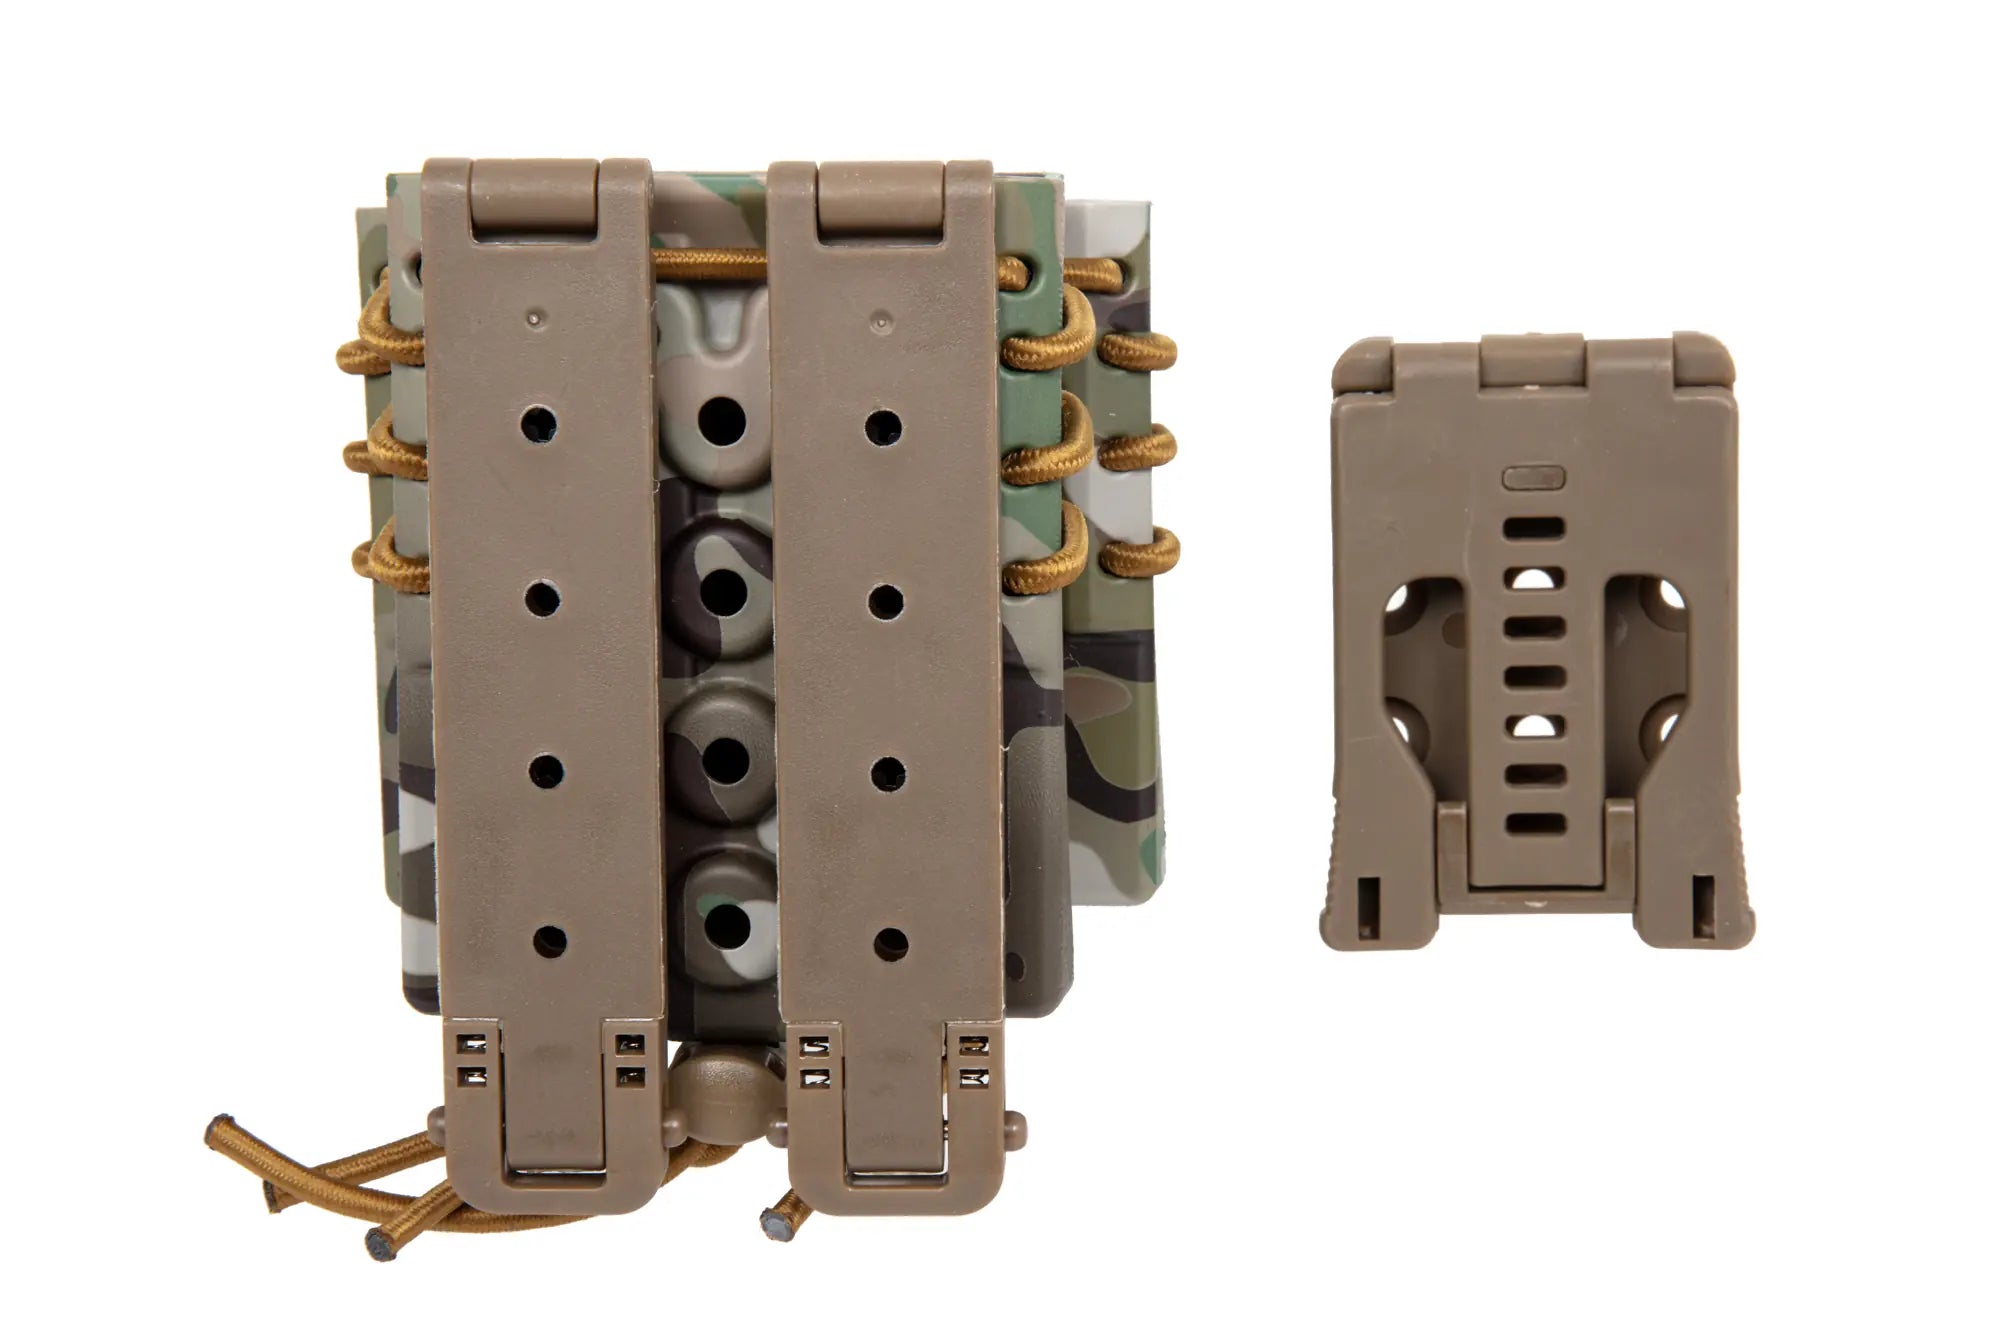 Carrier for 2 9mm magazines and an M4/M16 magazine Wosport Urban Assault Quick Pull Multicam